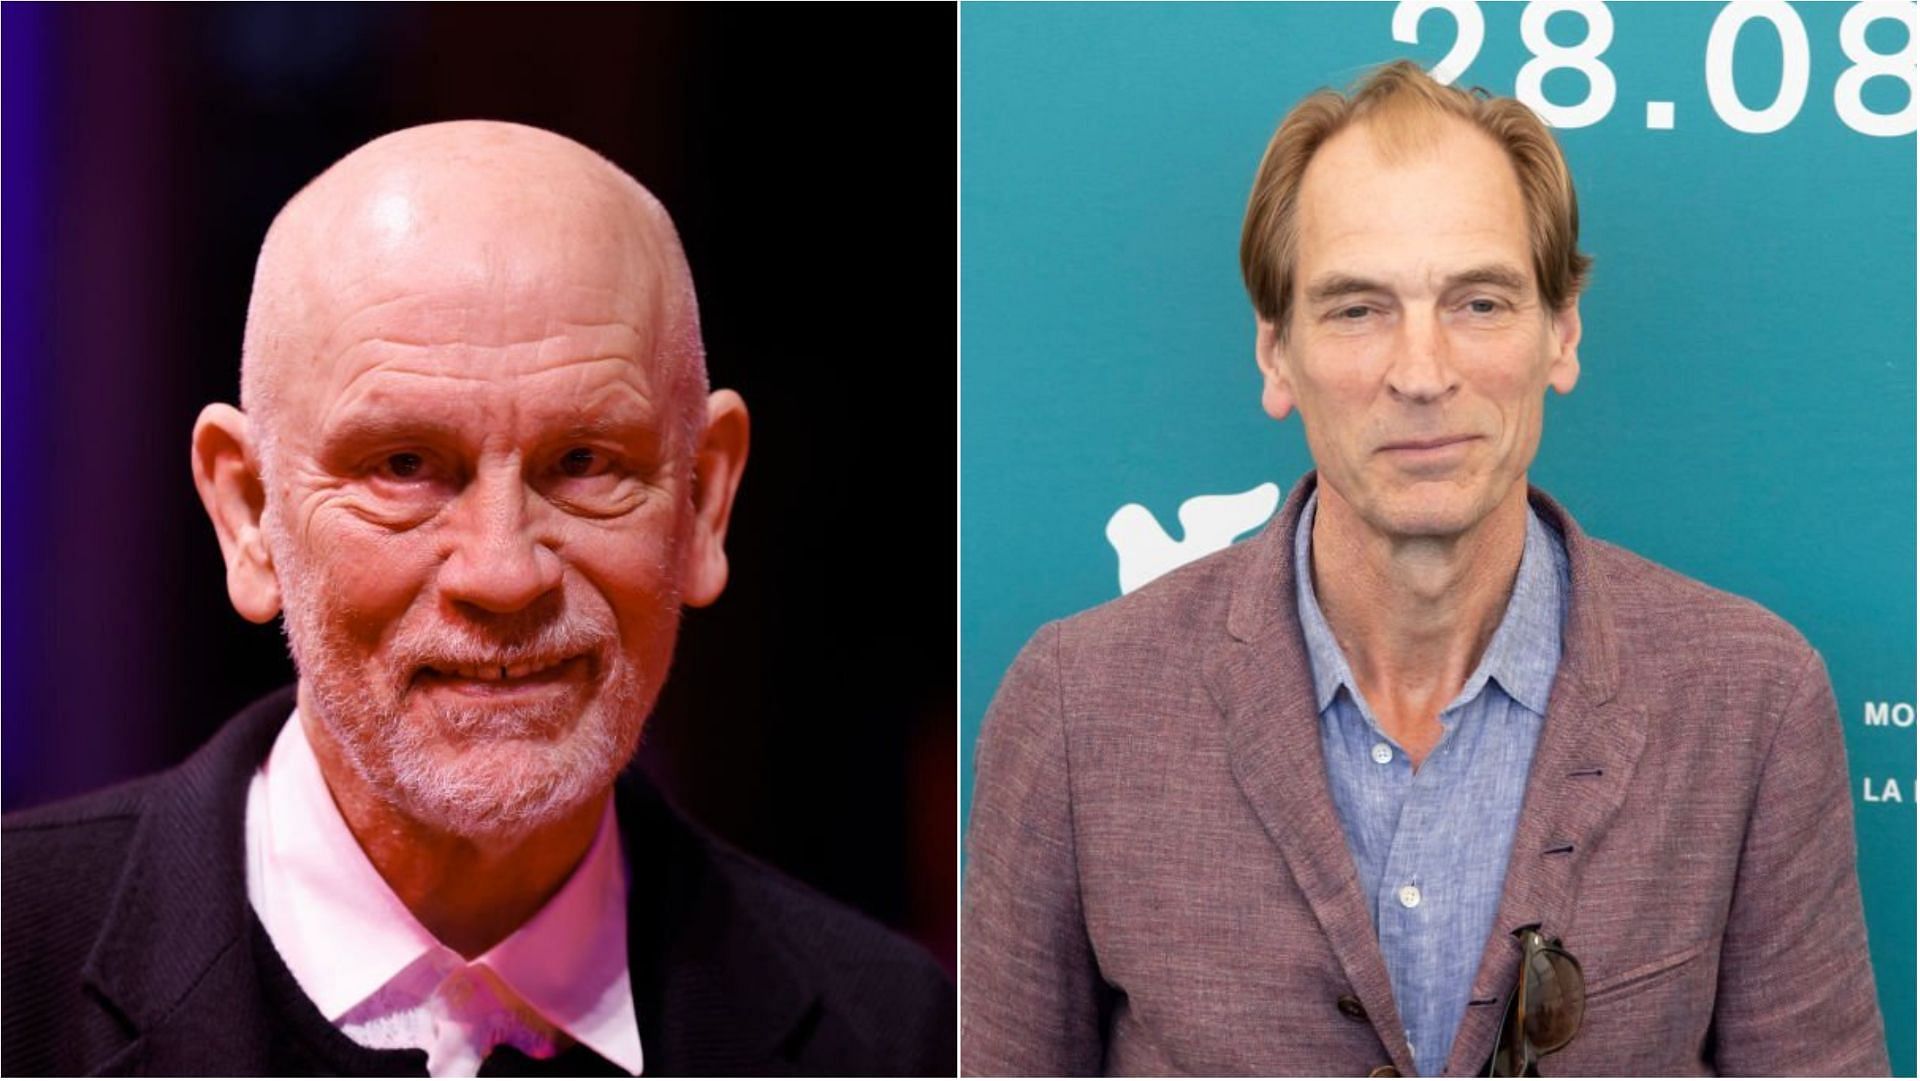 John Malkovich spoke about the disappearance of Julian Sands in a recent interview (Images via Franziska Krug and Marco Piraccini/Getty Images)